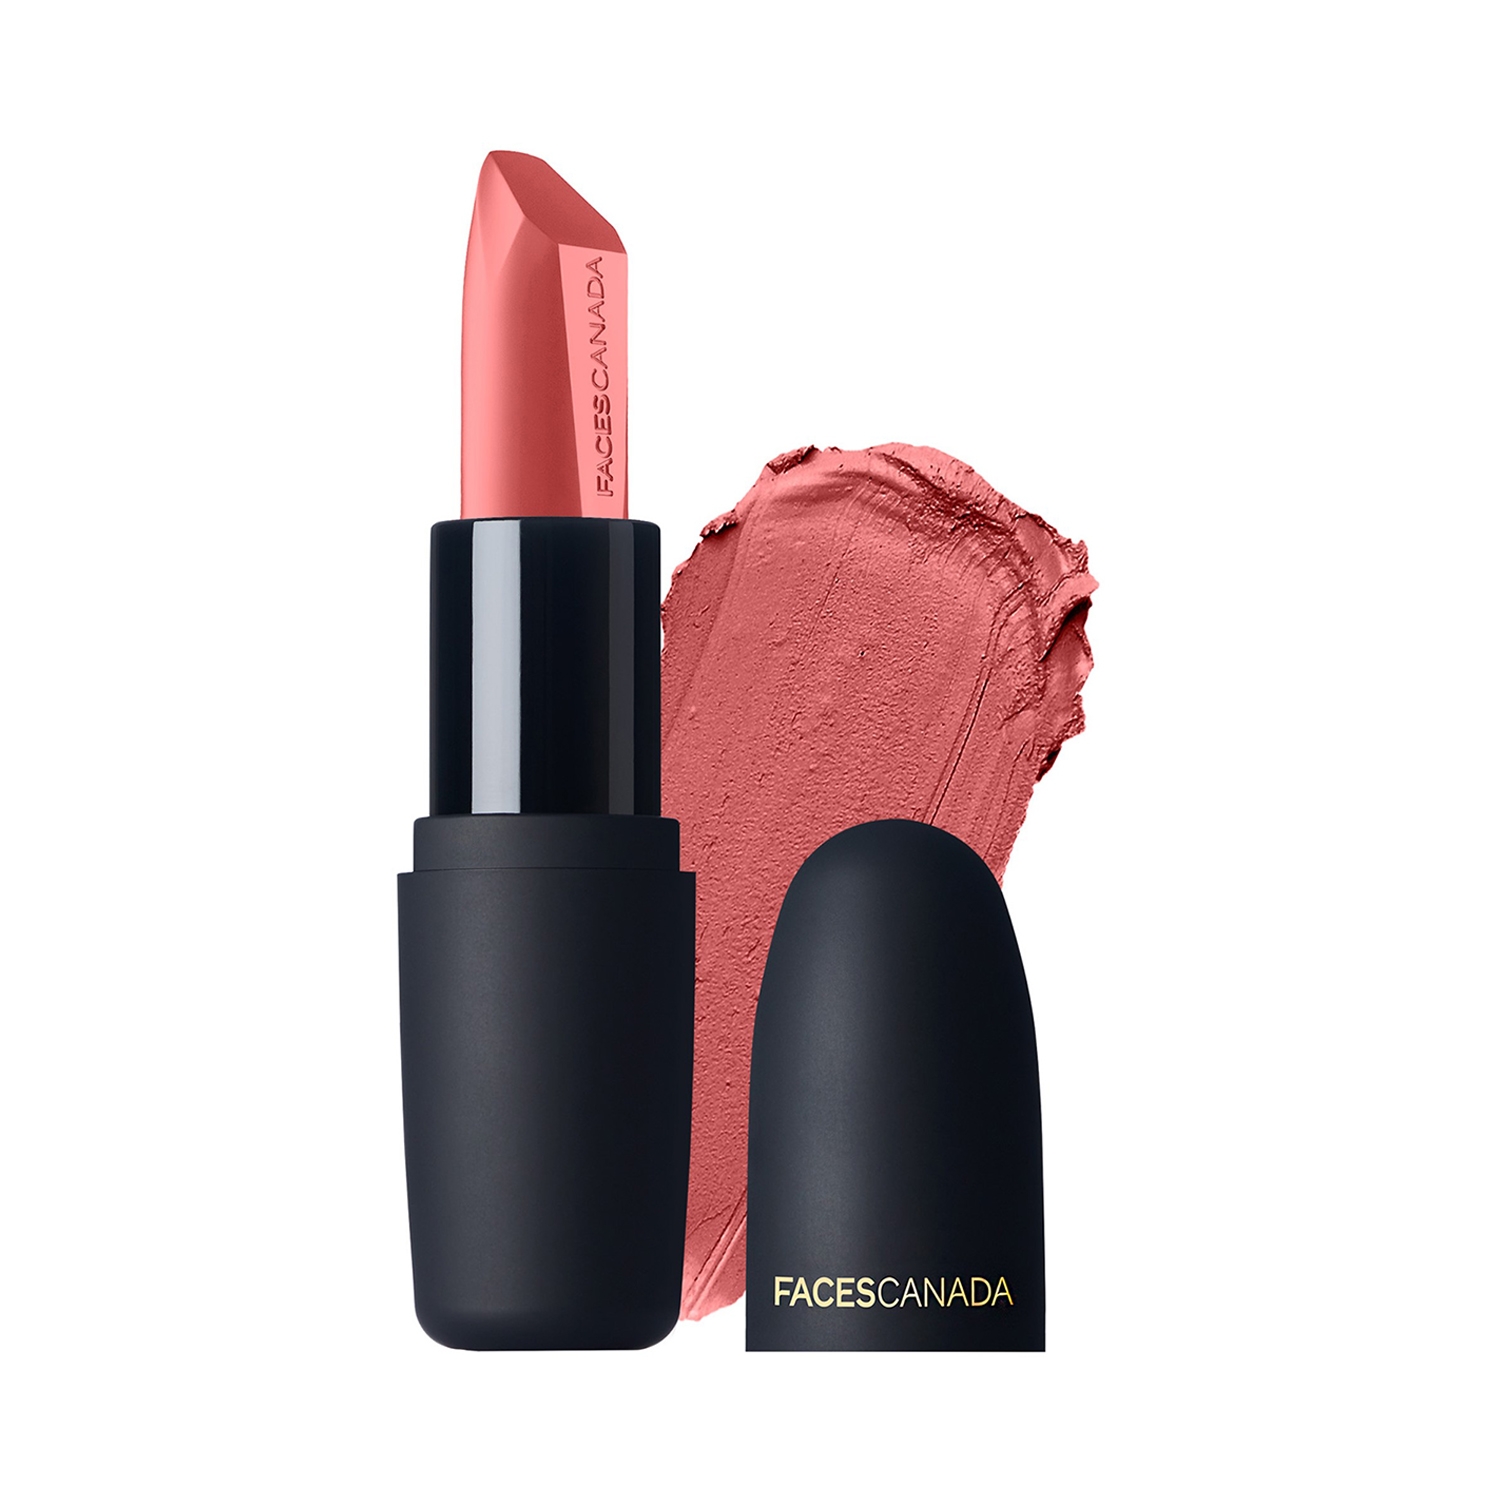 Faces Canada | Faces Canada Weightless Matte Finish Lipstick - 14 Peach Candy (4g)